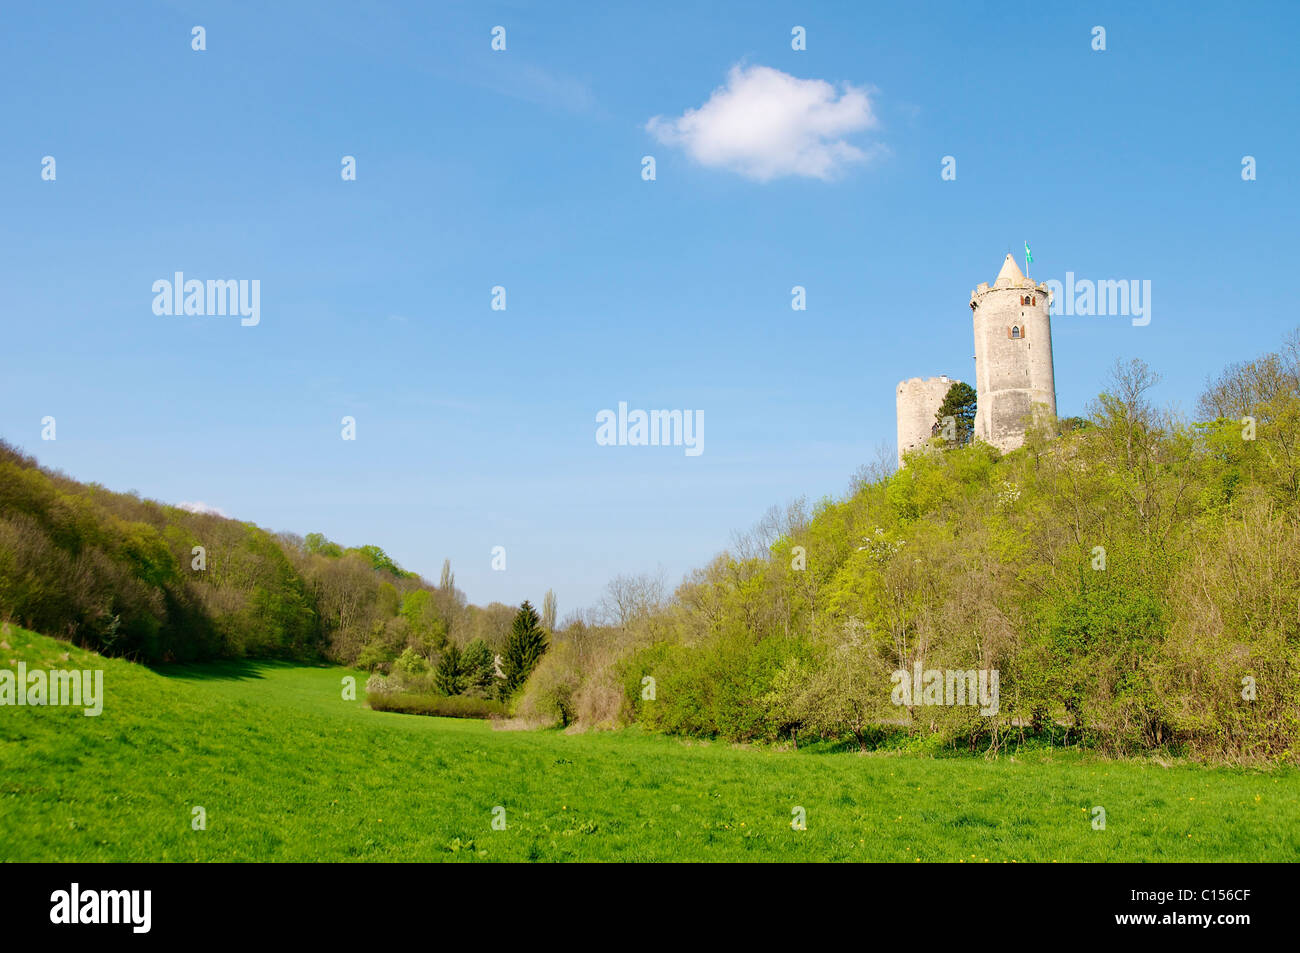 Burg Saaleck was mentioned first in 1140. The two remaining towers are 23 meters high. The ruins are a popular place to visit. Stock Photo